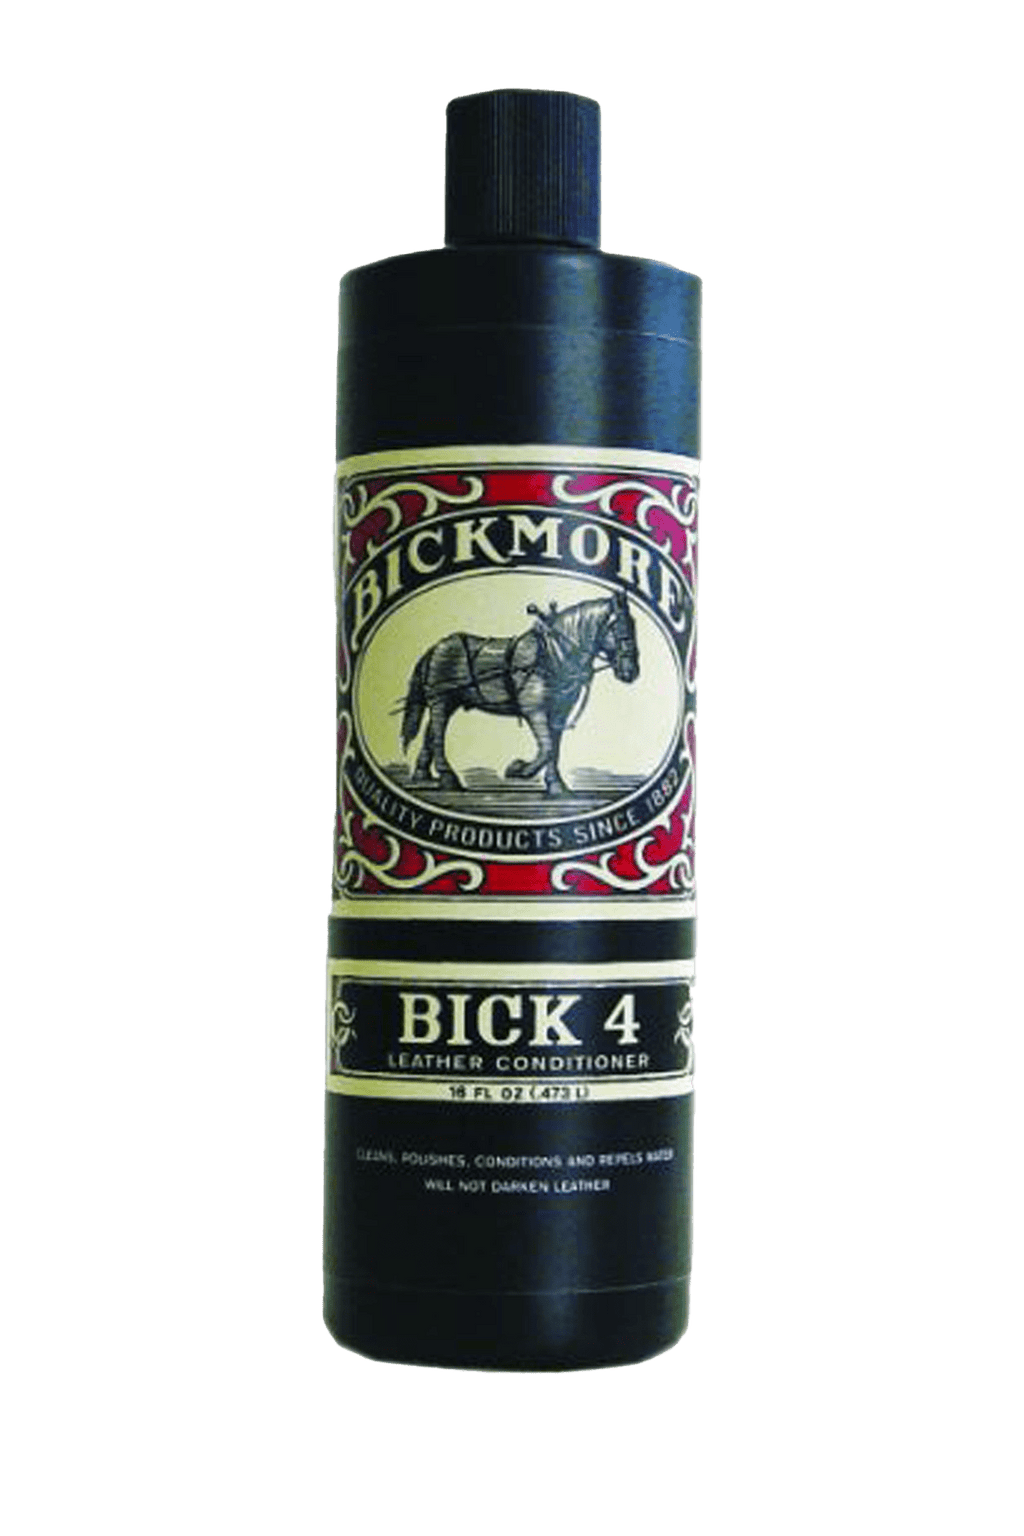 M&F Bickmore Boot Care 4: Leather Conditioner for New-Look Boots